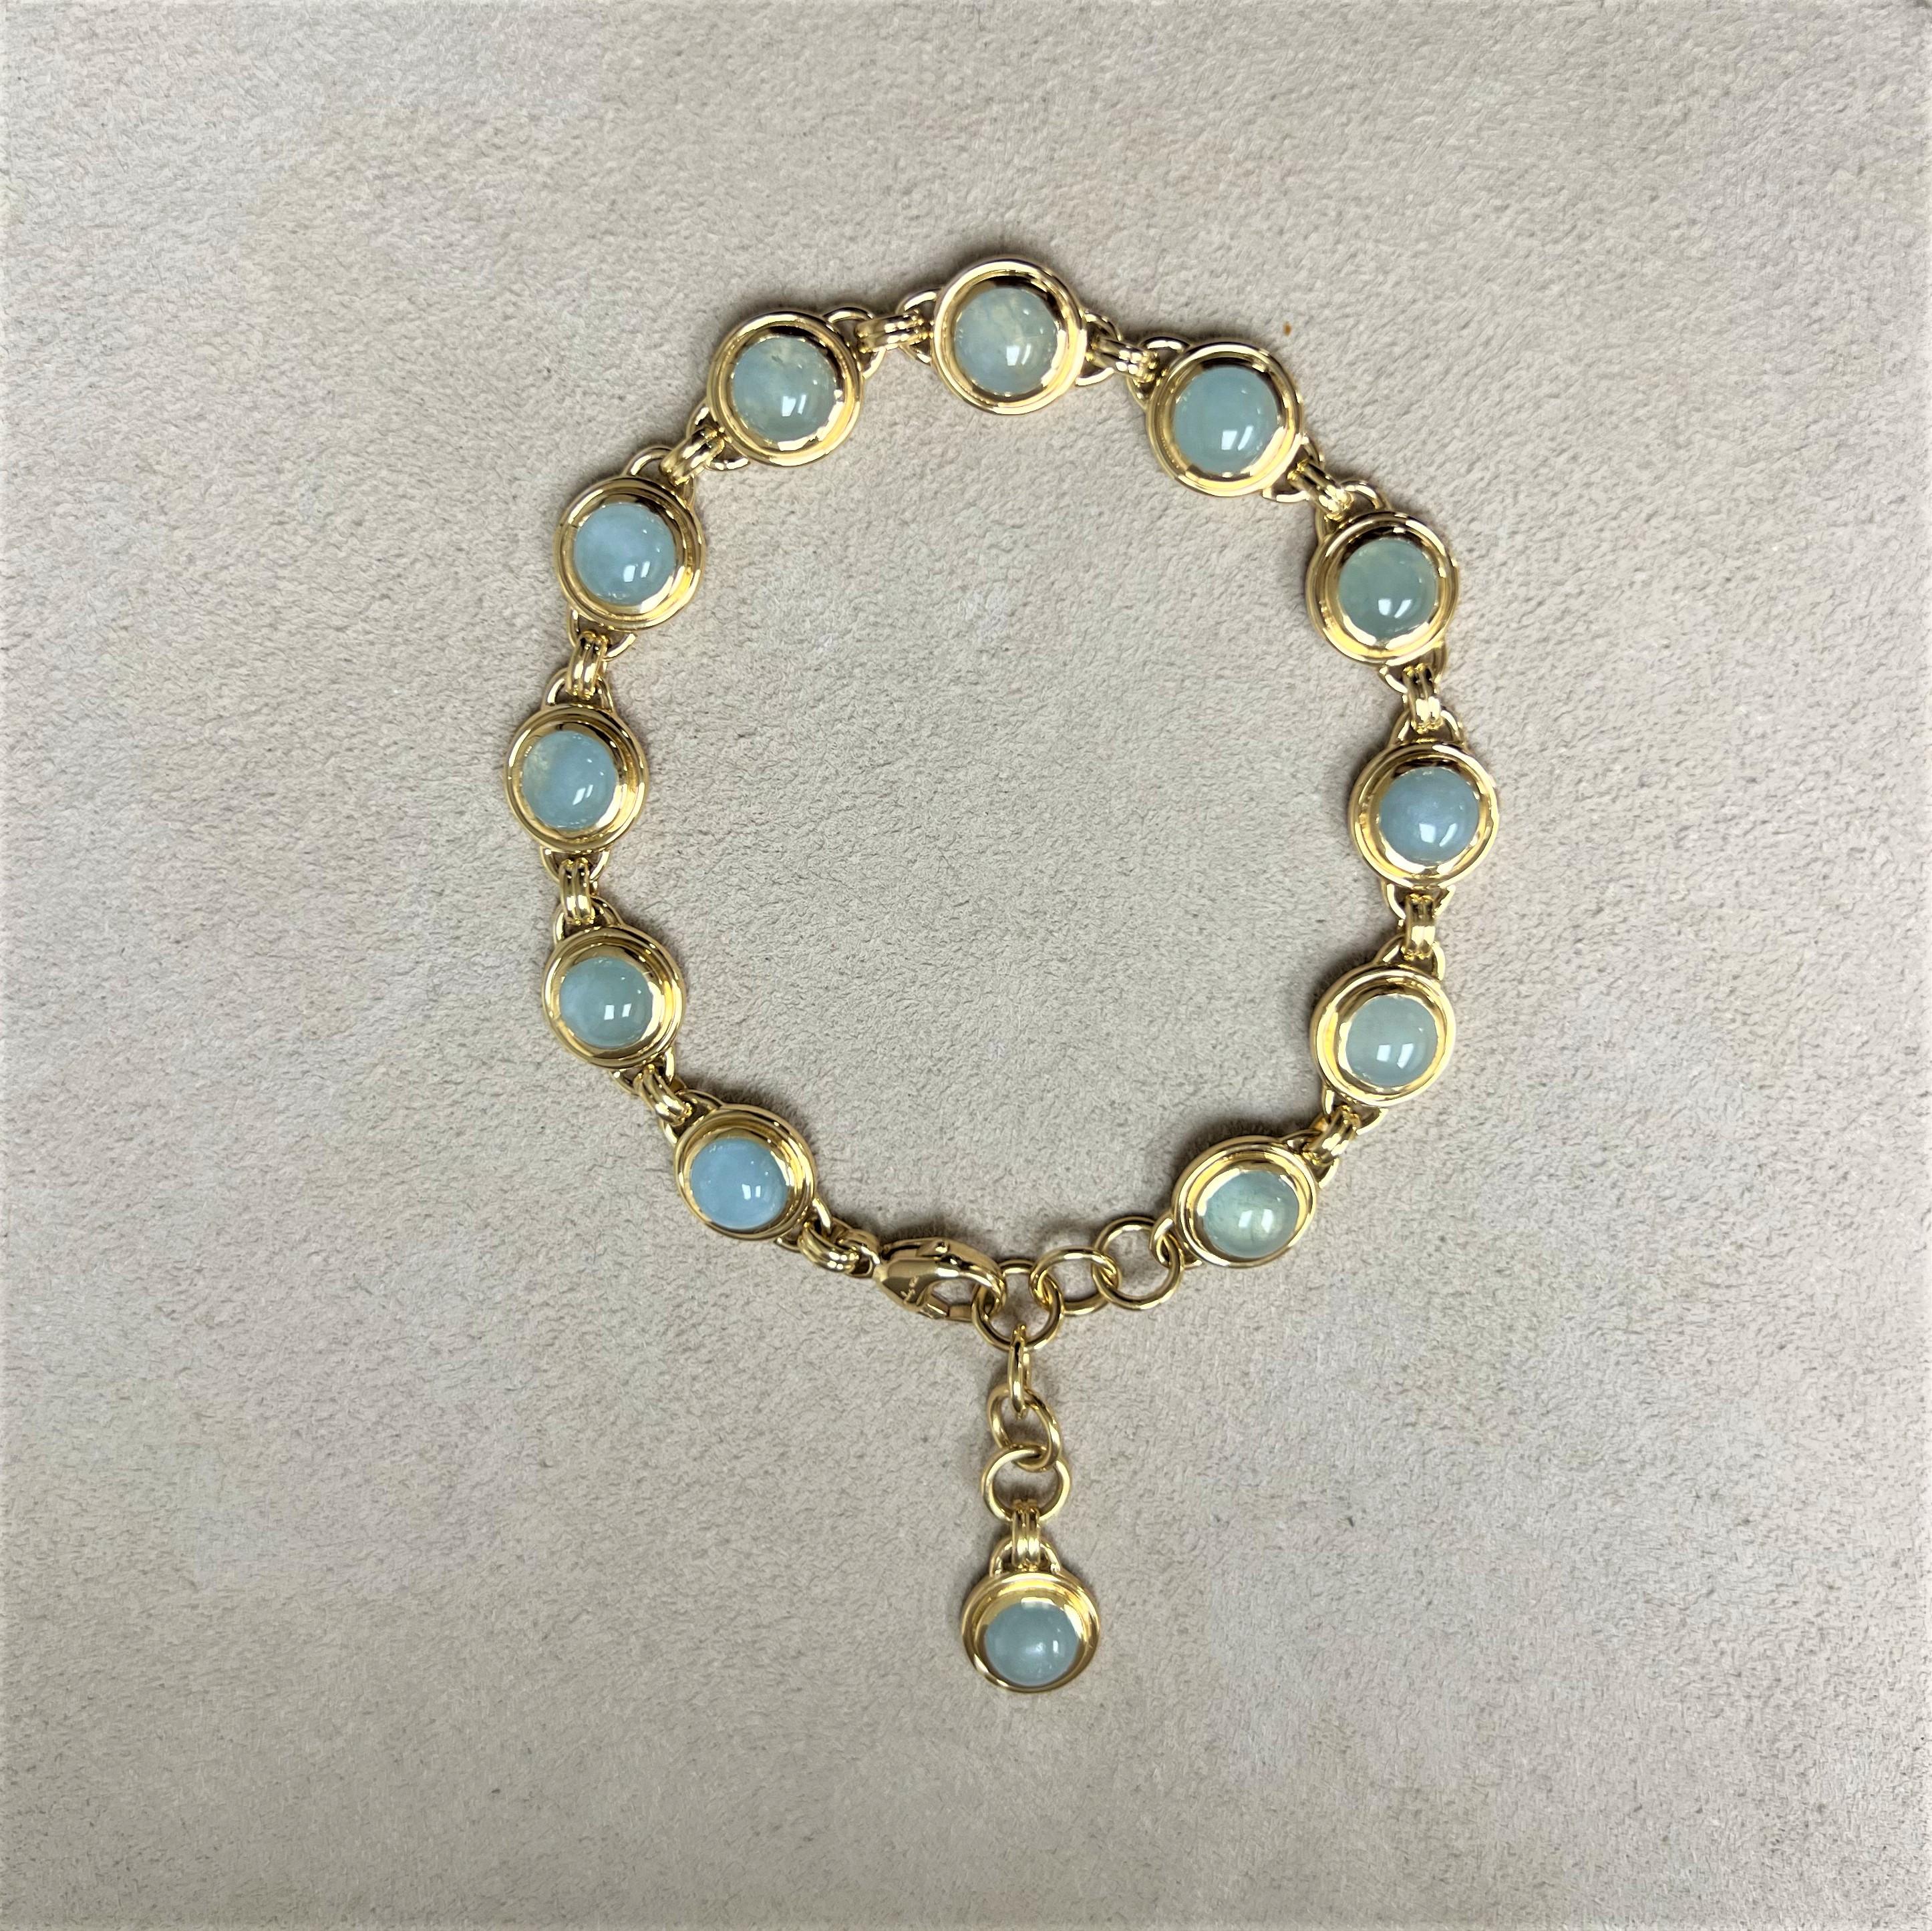 Created in 18 karat yellow gold
Aquamarine 12 carats approx.
8 inch length
18 karat yellow gold lobster clasp
Bracelet can be clasped at any length

Composed of 18 karat yellow gold, this stunning accessory houses a grand 12 carat aquamarine.